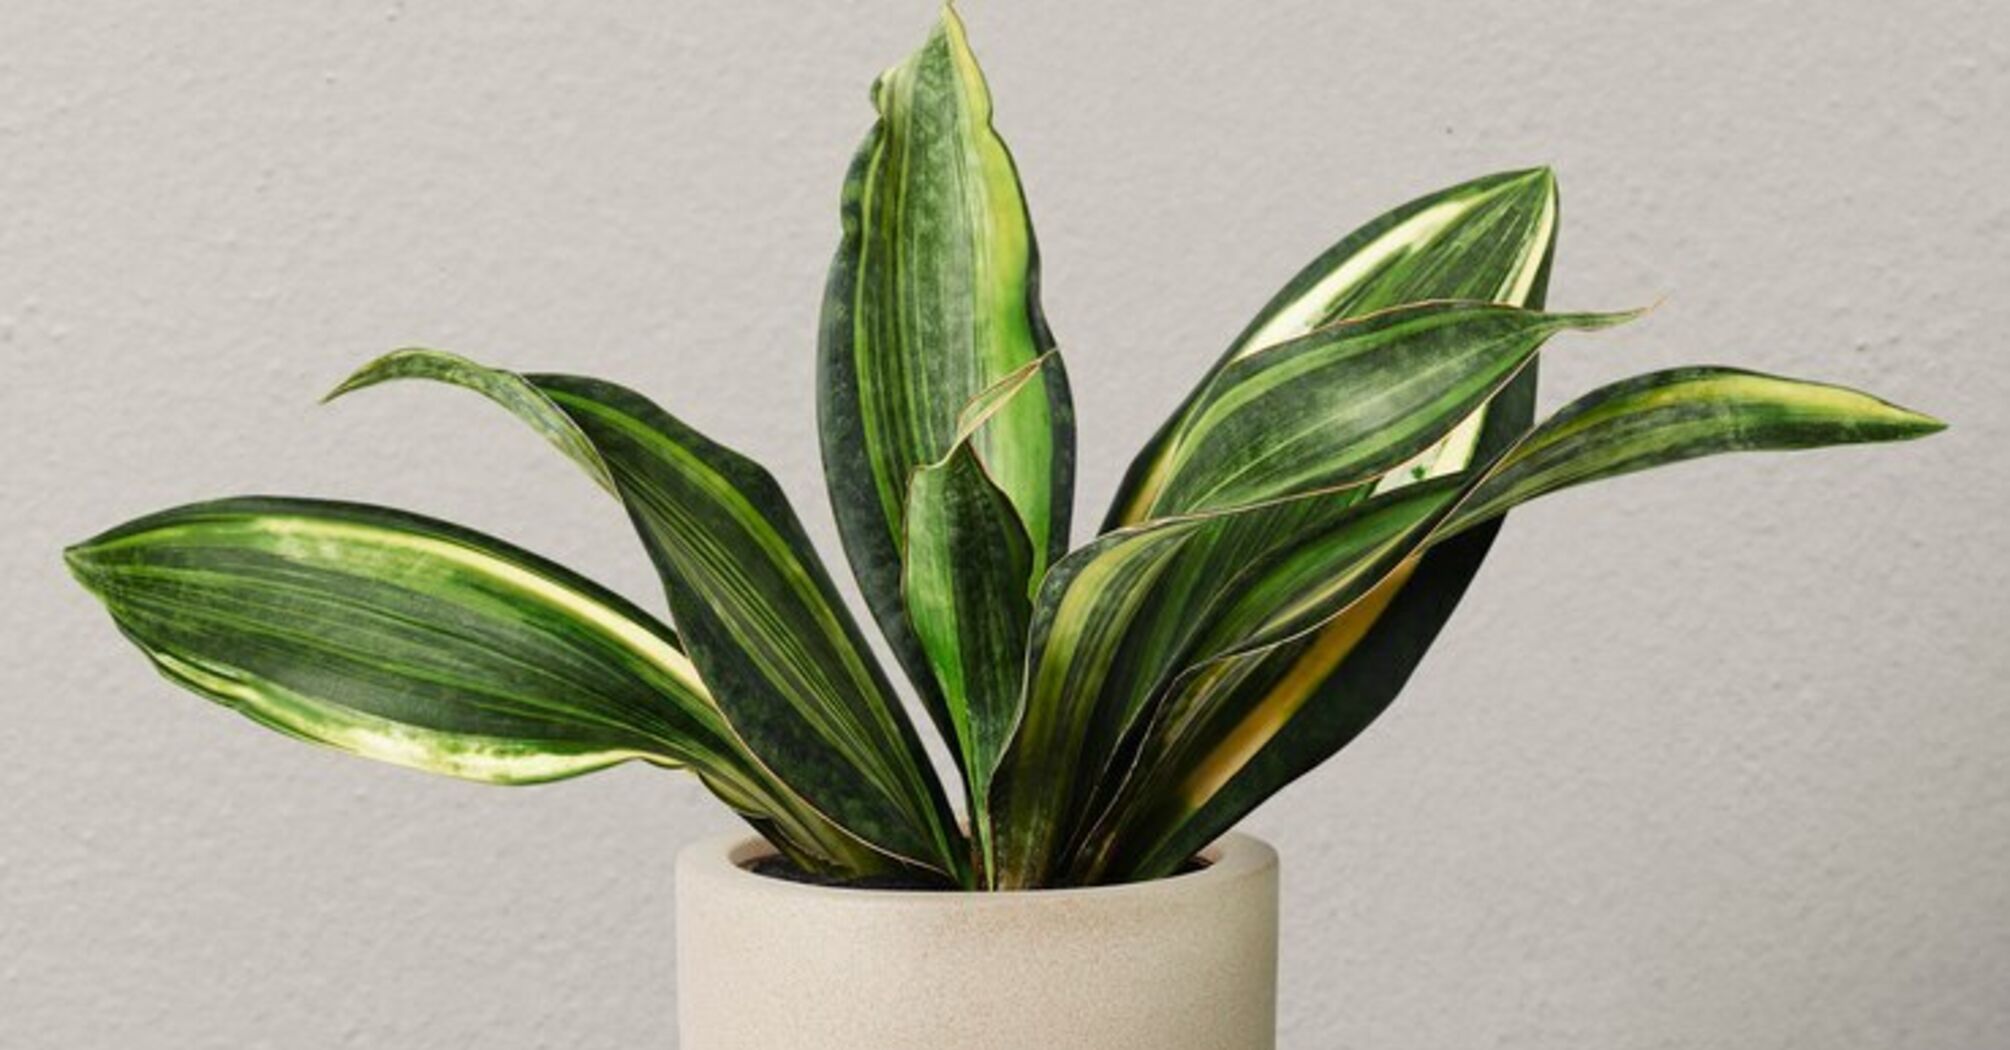 5 tips to help take care of indoor plants while on vacation